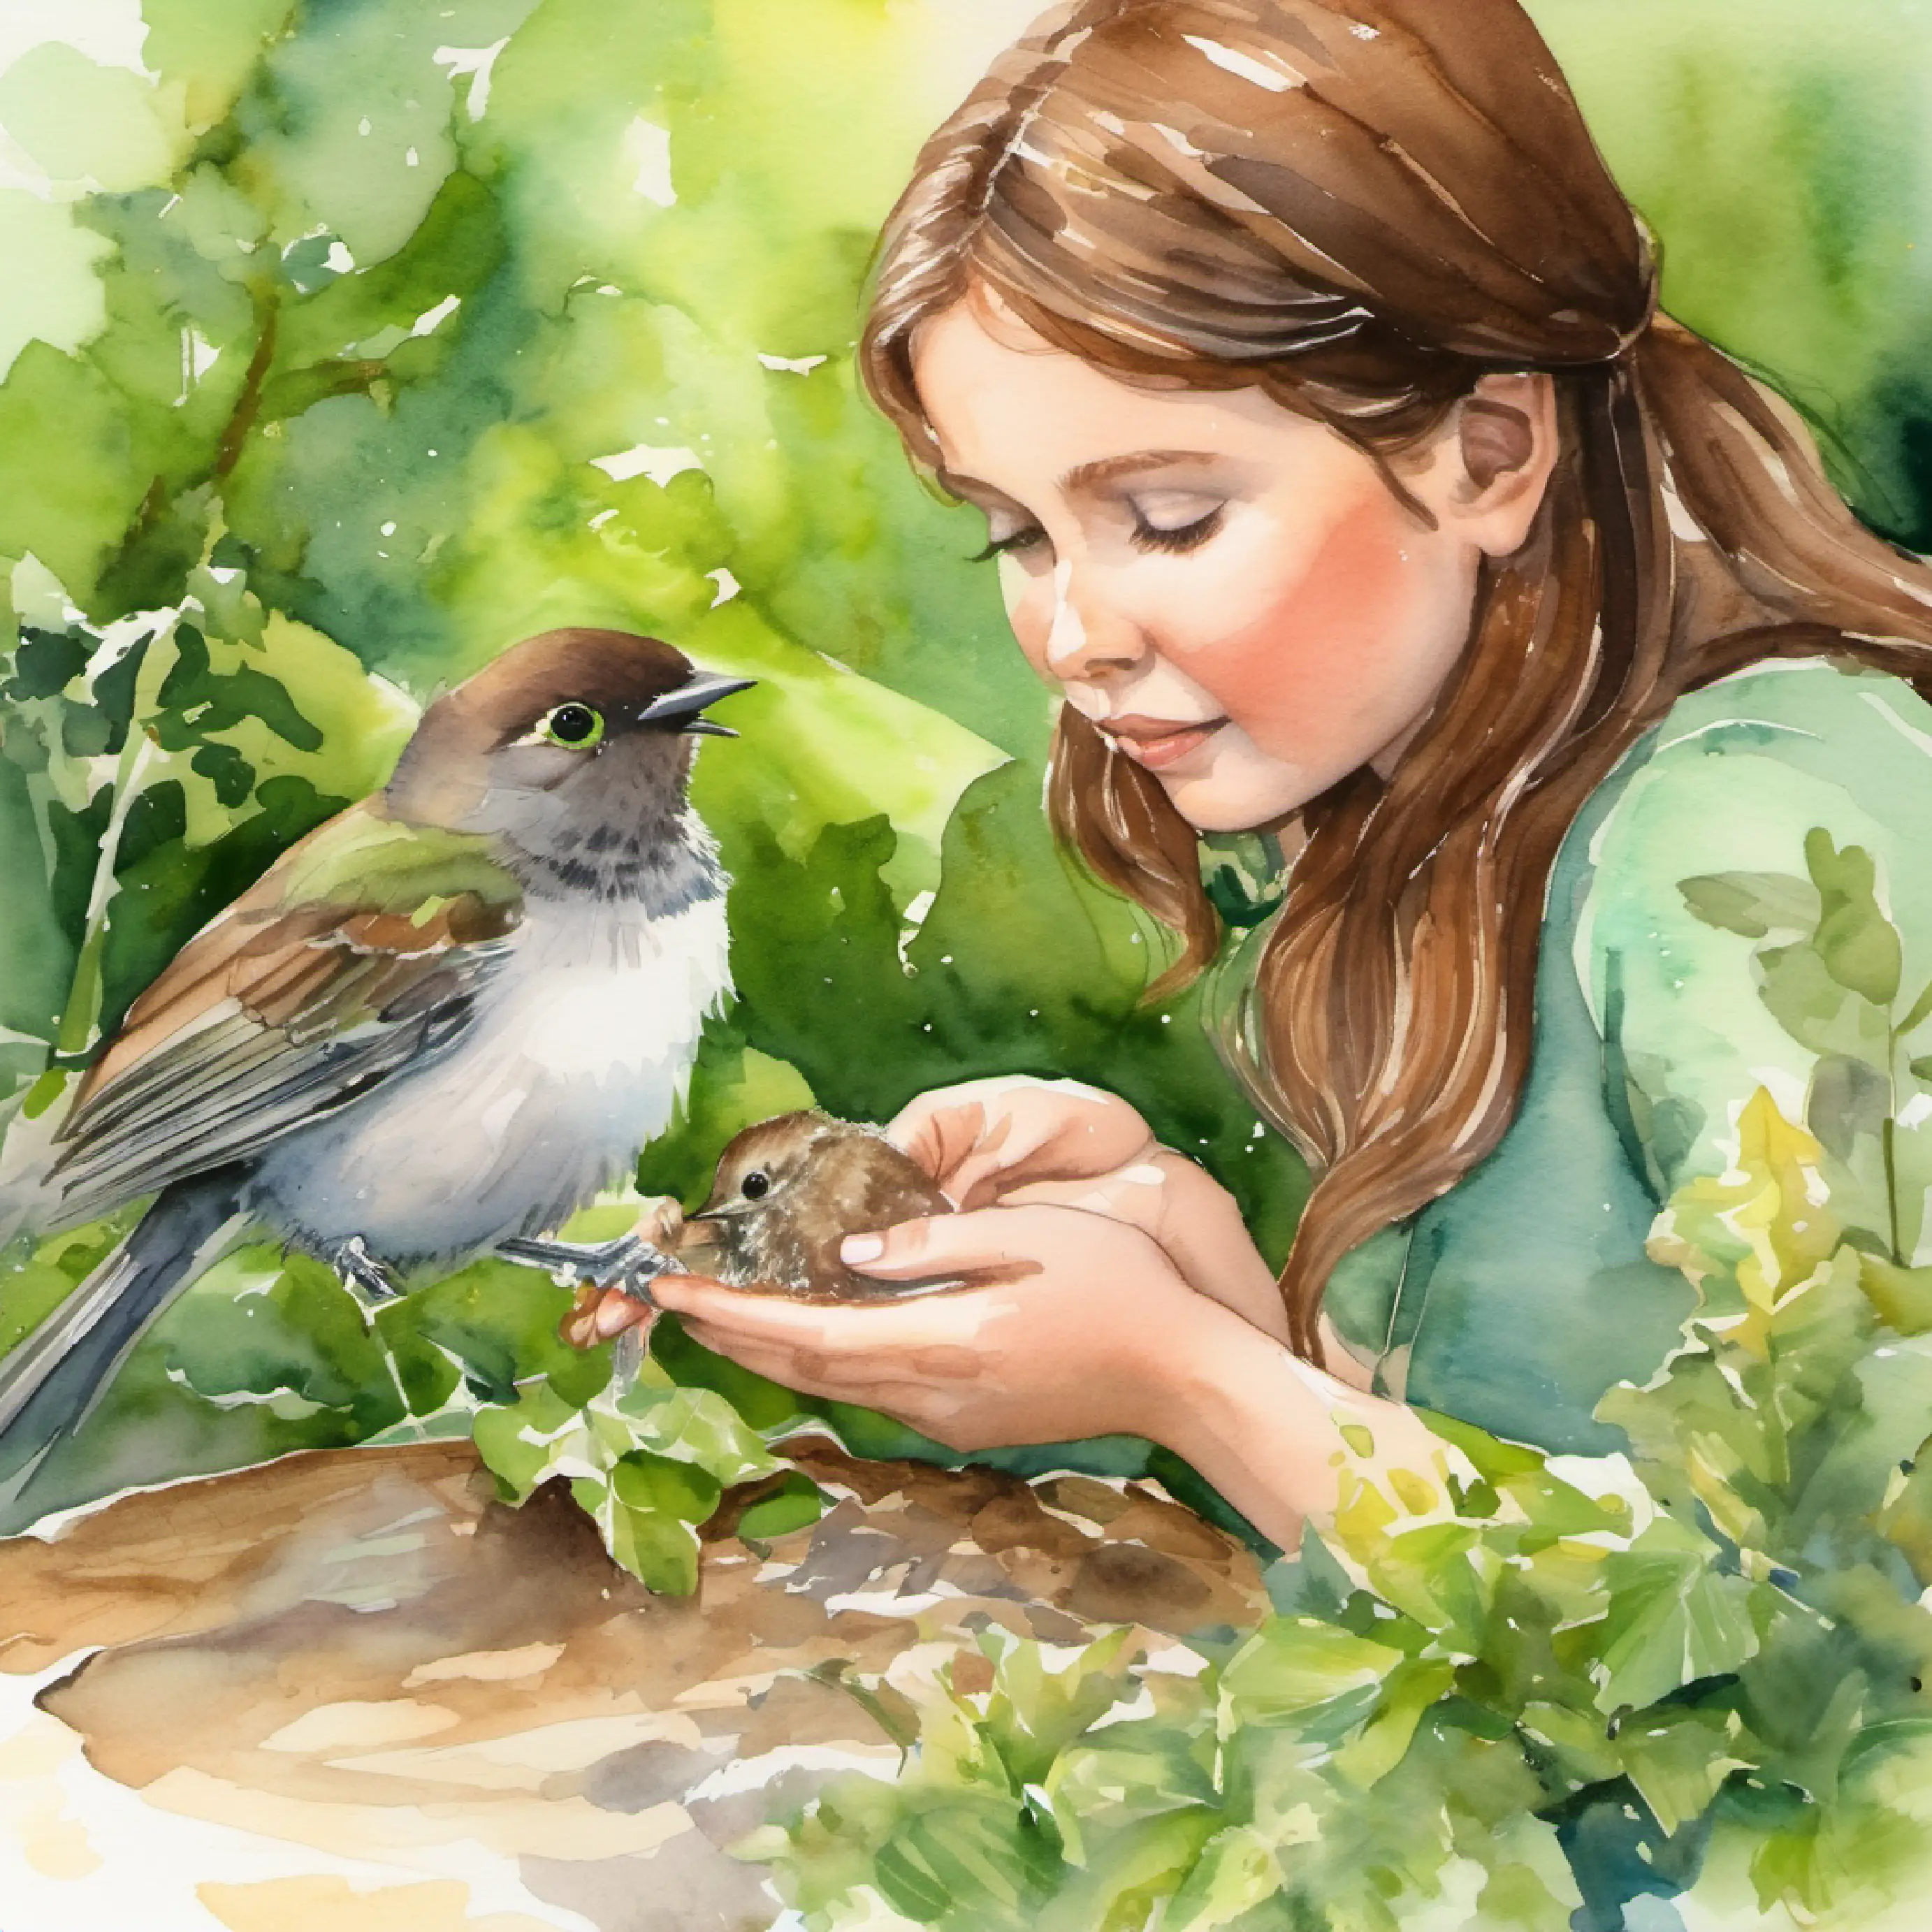 Girl with brown hair, fair skin, and green eyes proposes helping the baby birds by finding food.